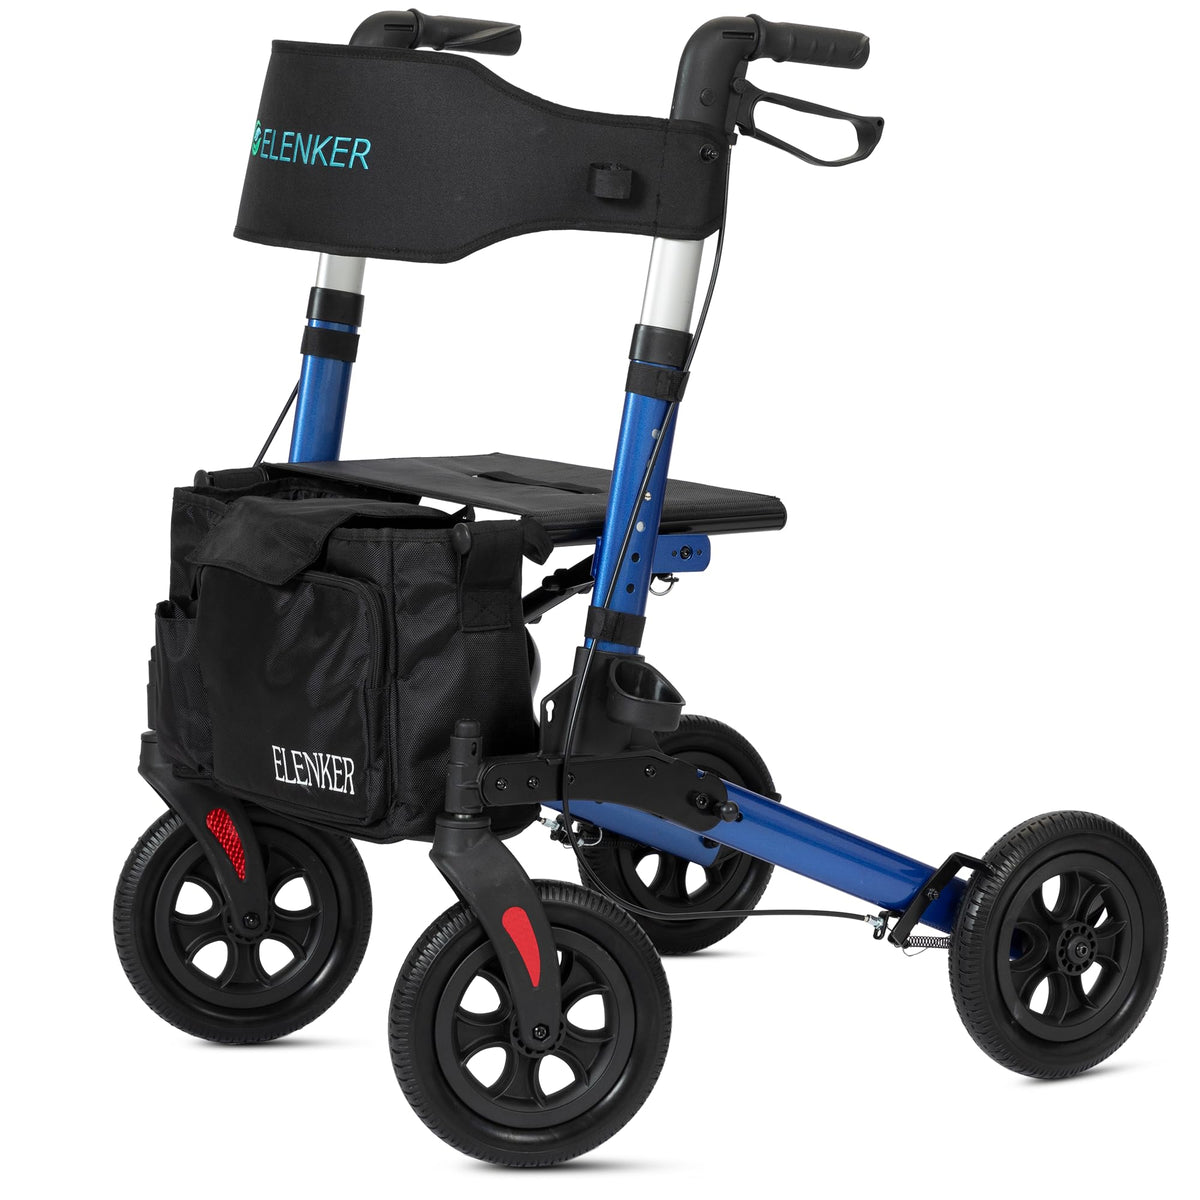 ELENKER® All-Terrain Rollator Walker: Compact Folding, Outdoor Mobility,  and Convenient Features